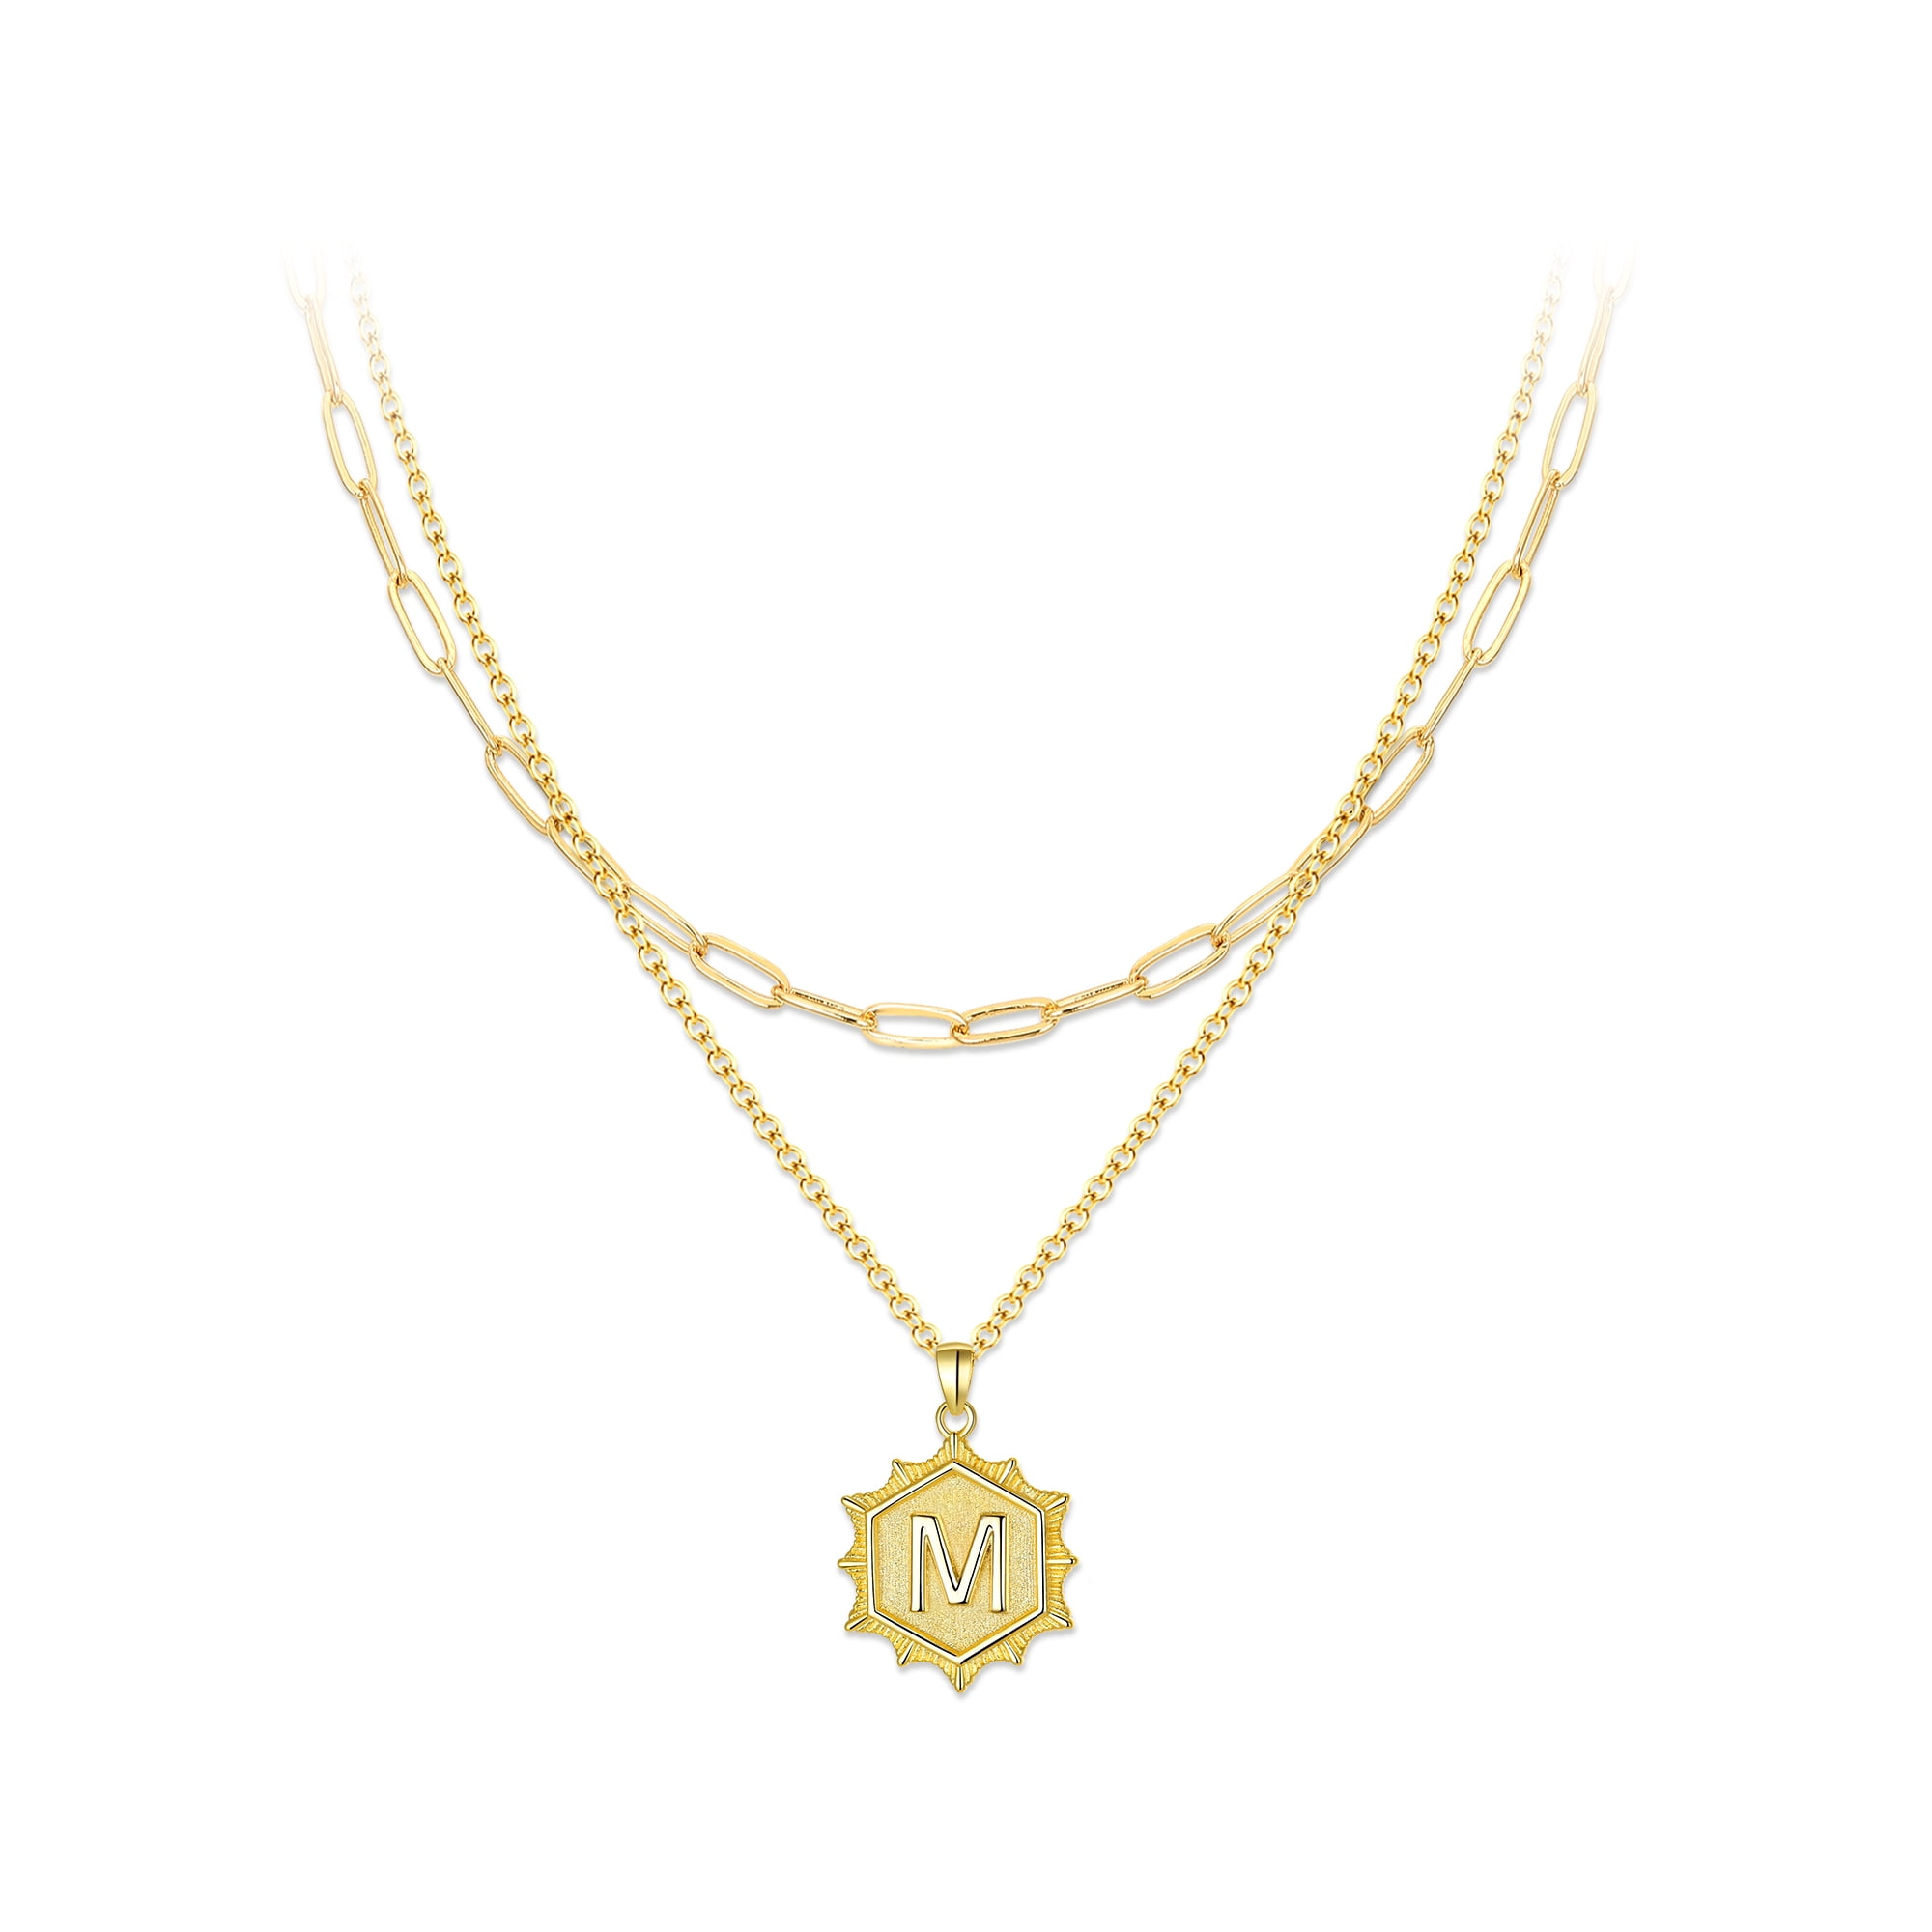 Wedure Dainty 14k Gold Plated Layered Octagonal Shape Necklaces for Women,  Layering Necklaces Pendant Initial M Necklace Paperclip Chain Necklace  Simple Adjustable for Women 